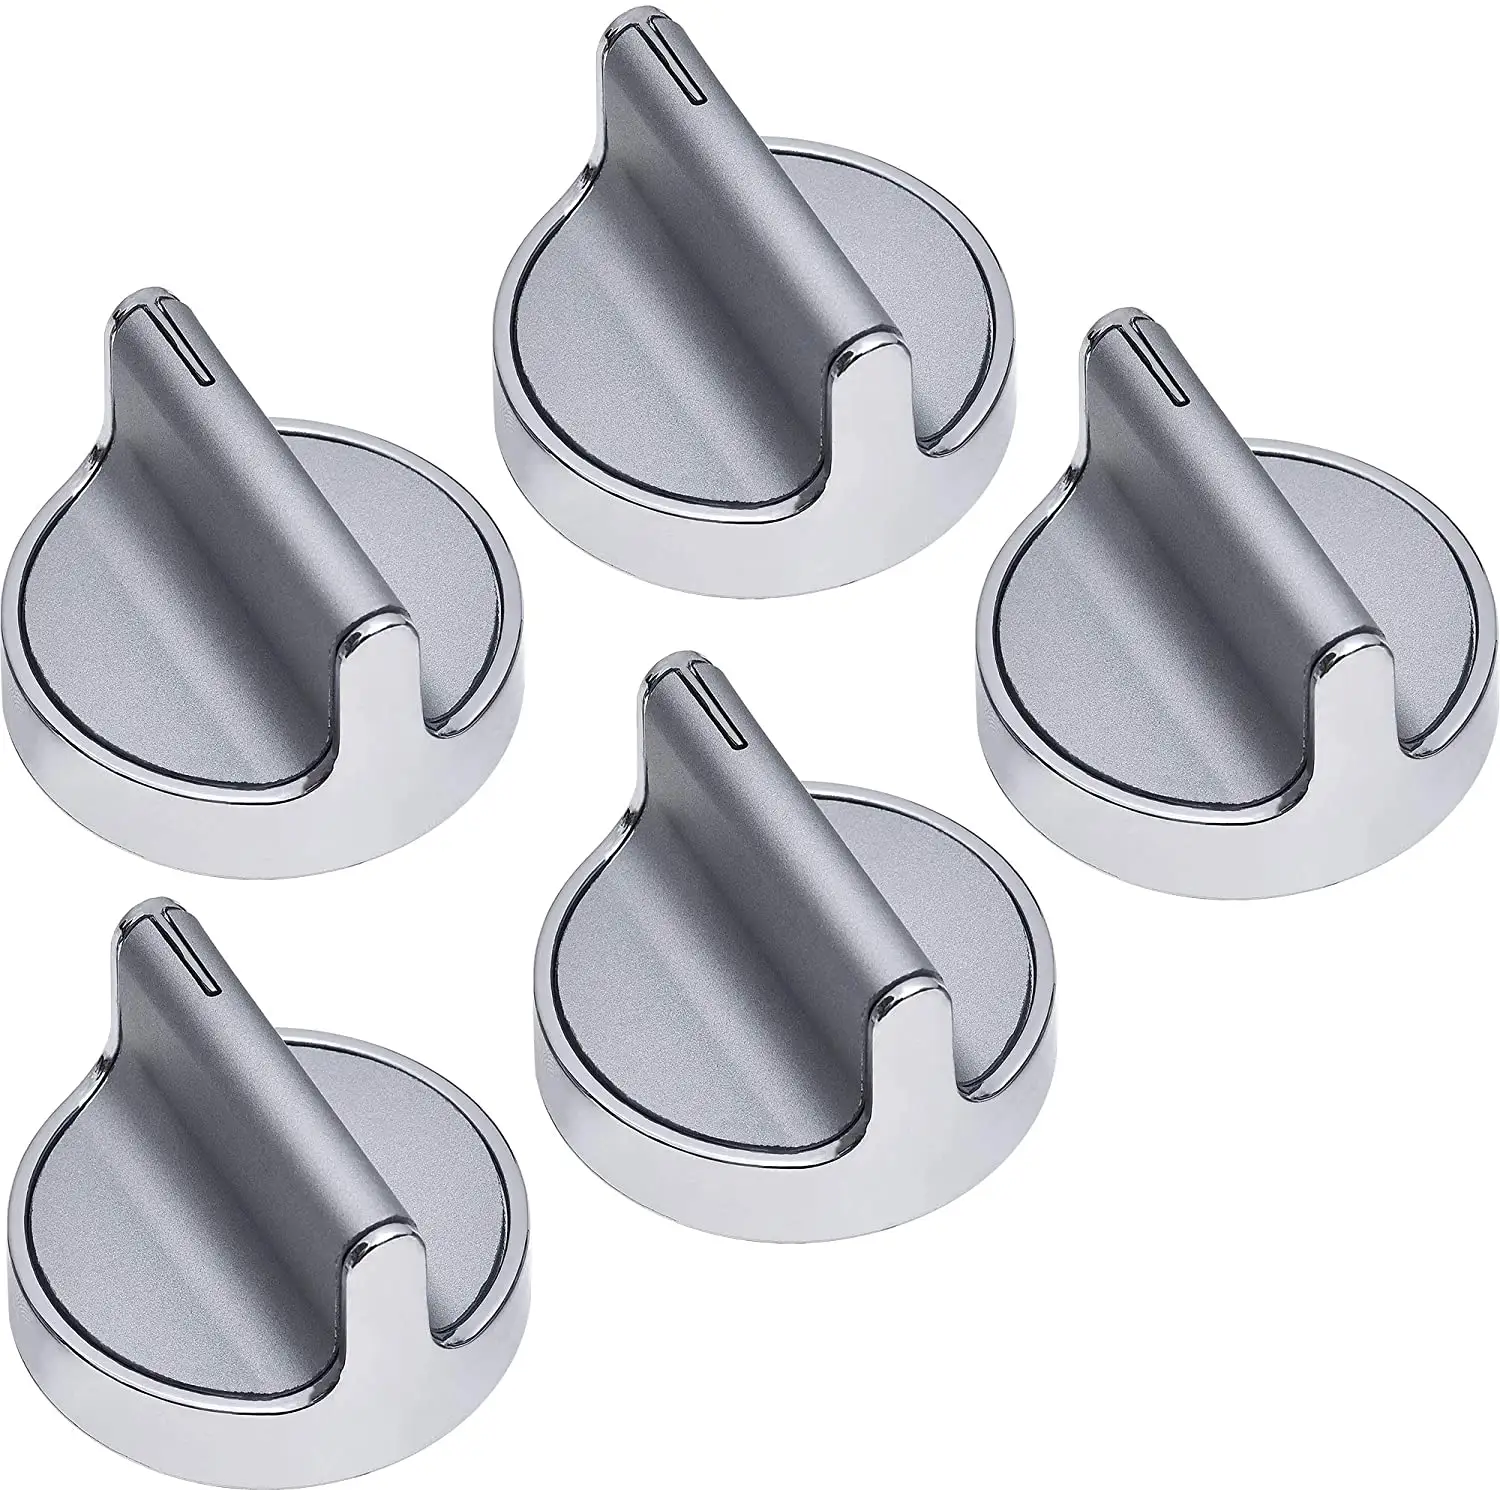 5-Pack W10594481 Range Knob Replacement For Whirlpool WPW10594481 - Compatible With WPW10594481 Stainless Steel Cooker Burner Co